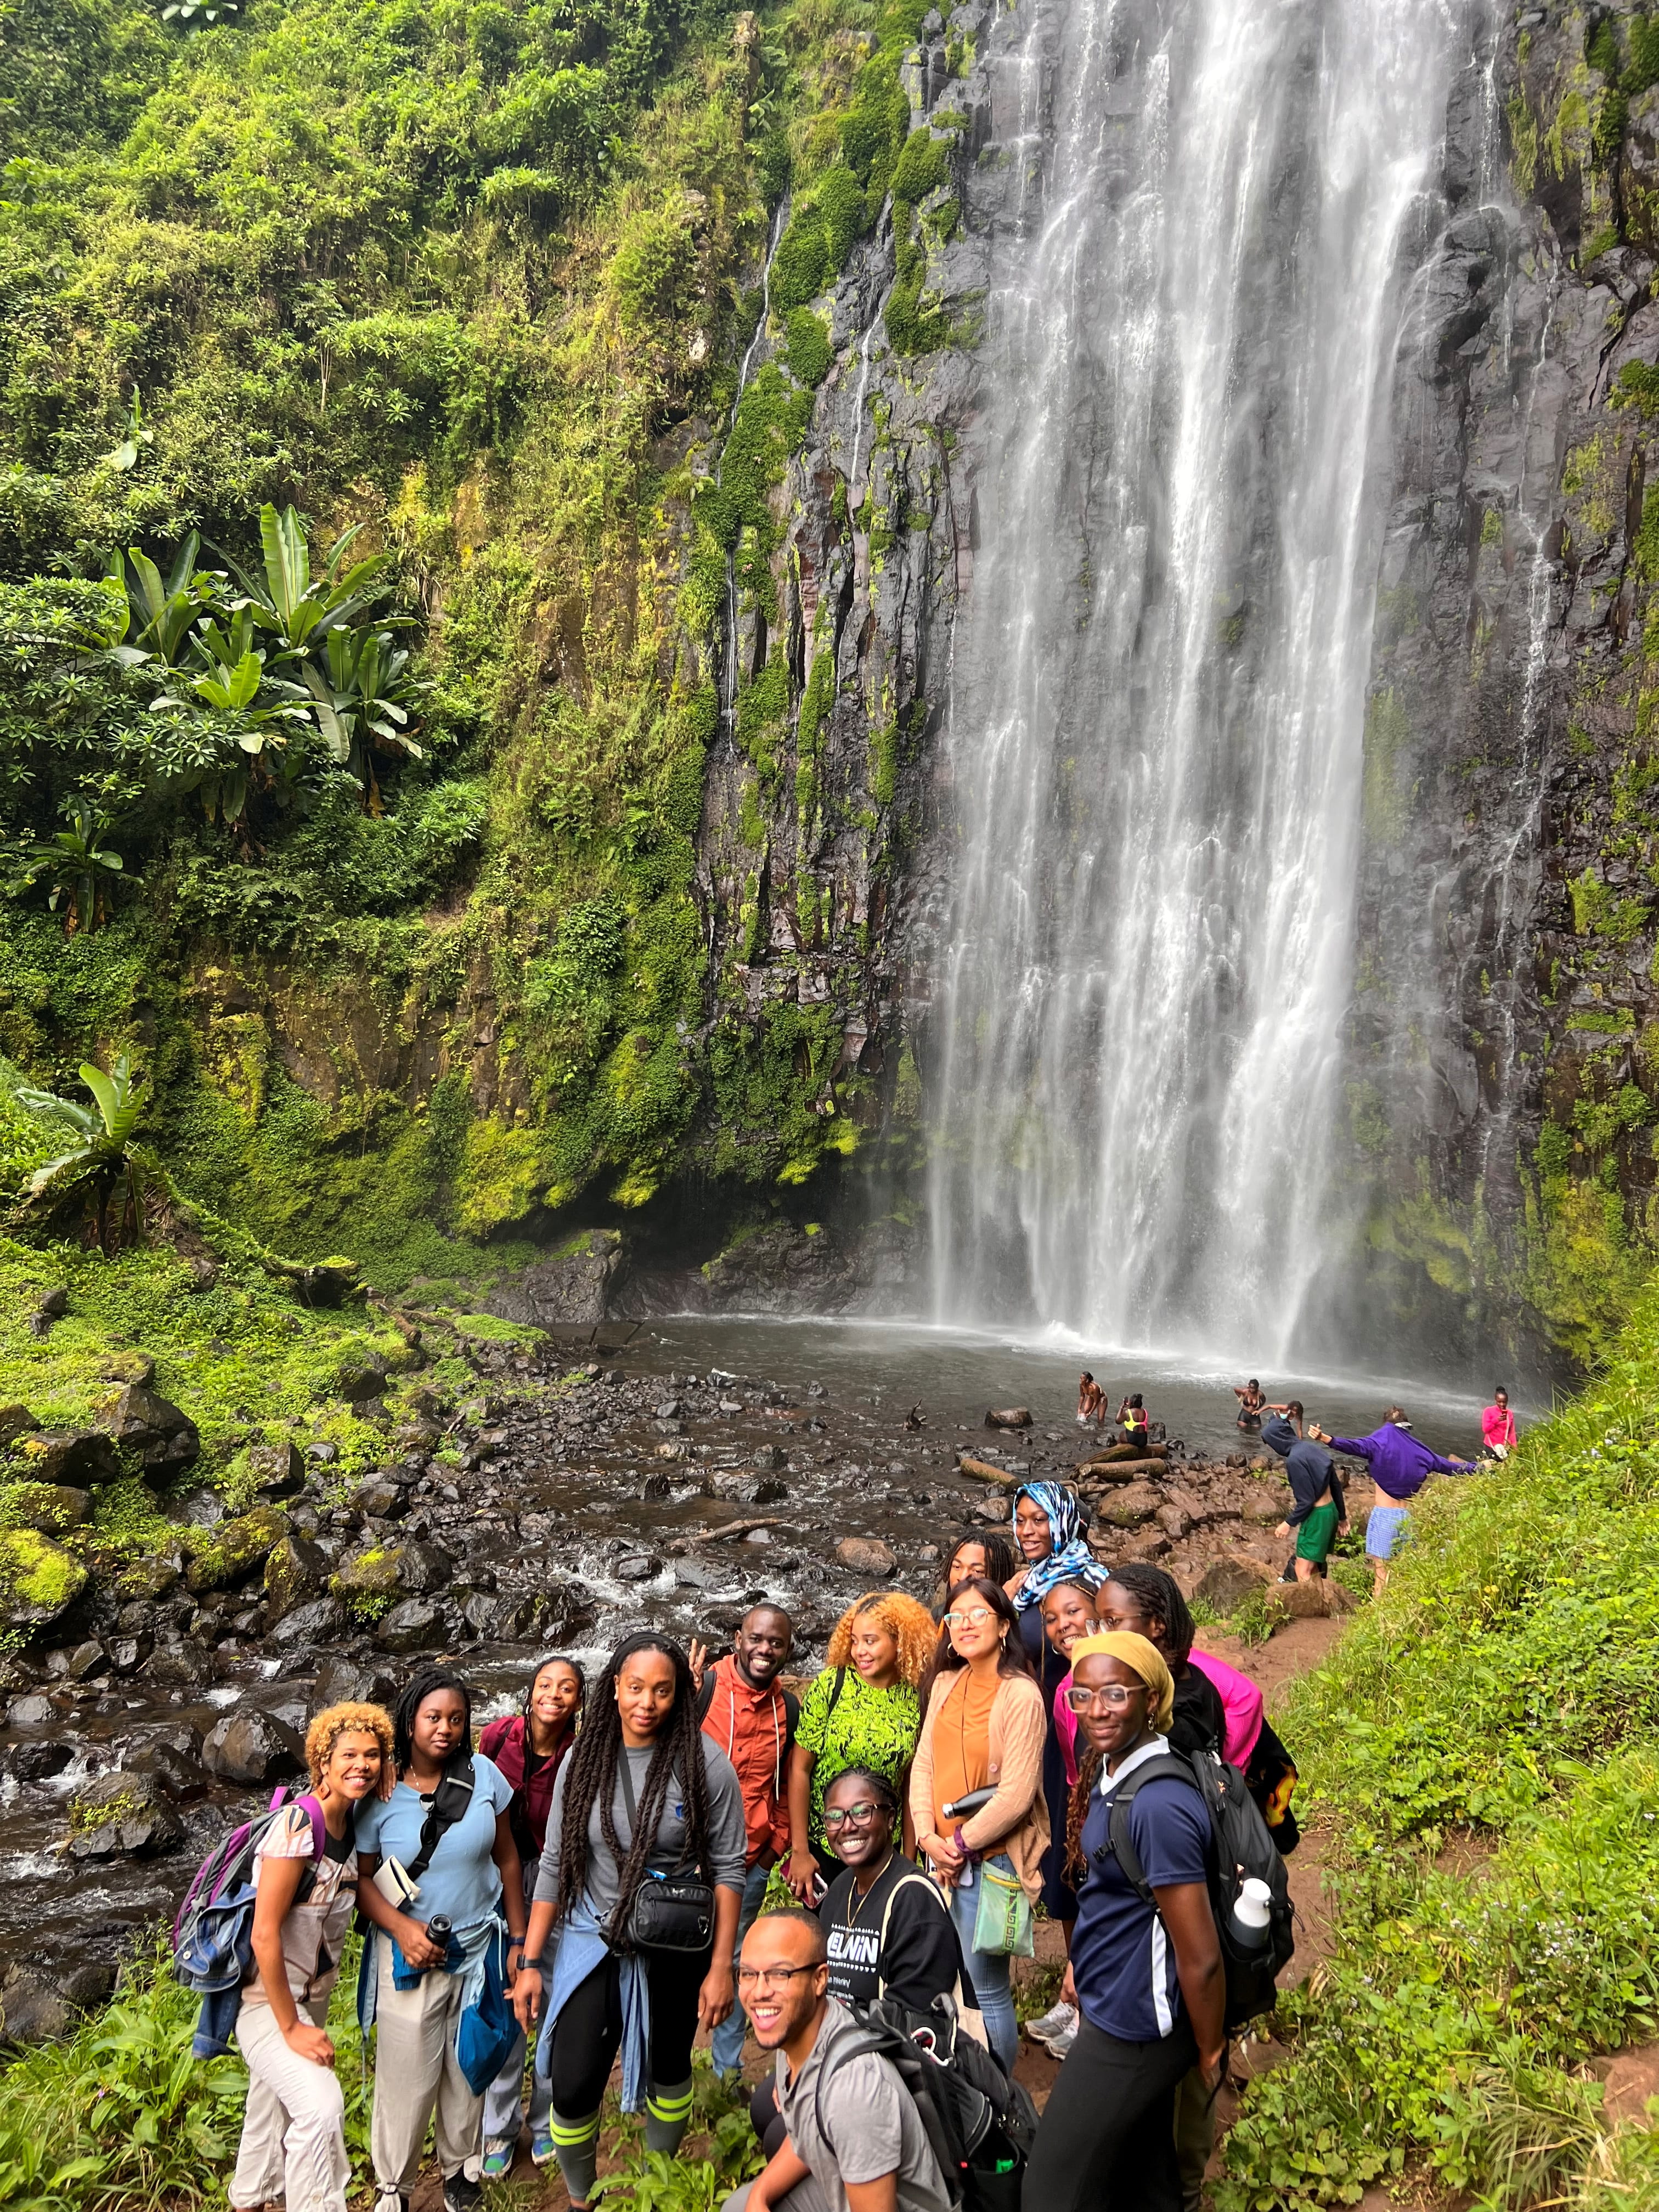 Students in front of a waterfall.